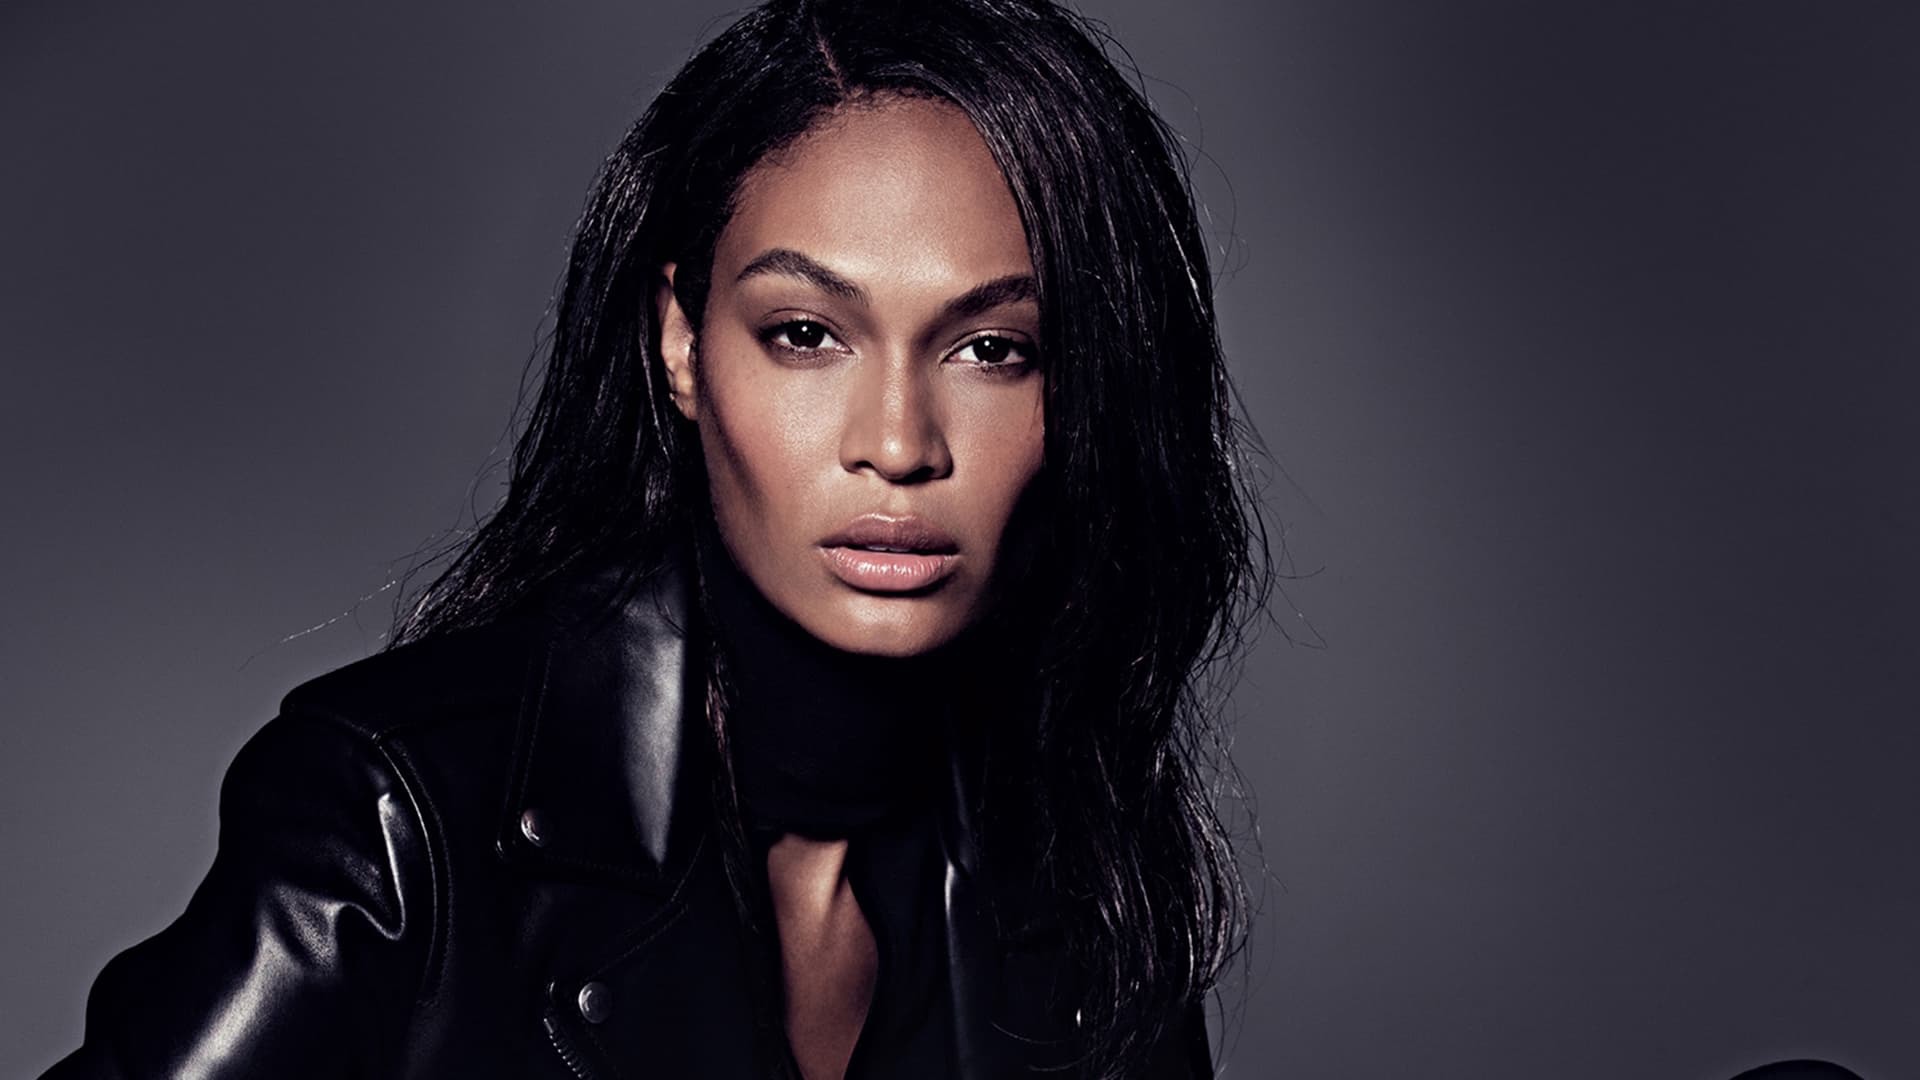 Joan Smalls Wallpapers Images Photos Pictures Backgrounds